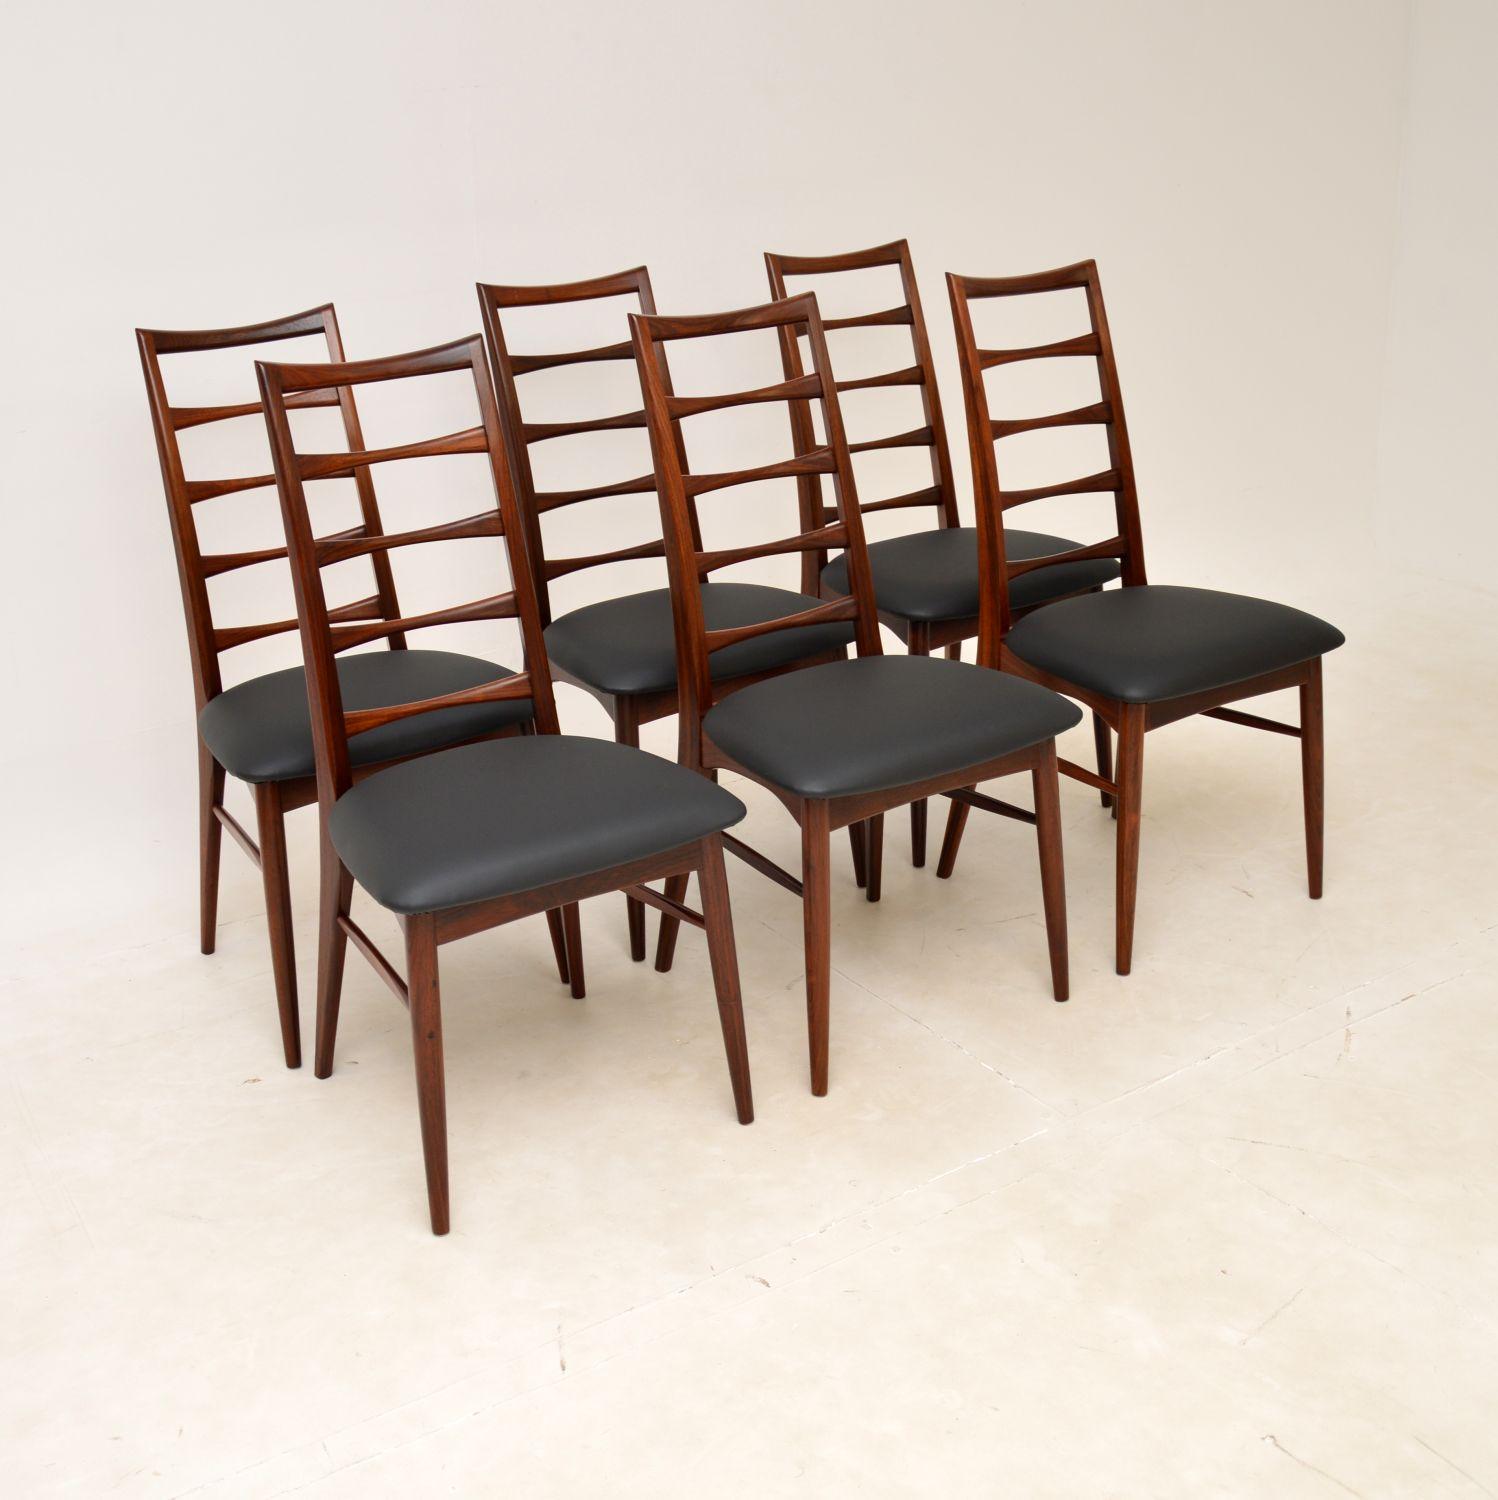 An extremely stylish and rare set of six Danish dining chairs. They were designed by Niels Koefoed and made in Denmark by Koefoed Hornslet in the 1960’s. This model is called the ‘Lis’ chair.

The quality is outstanding, with sculptural and elegant